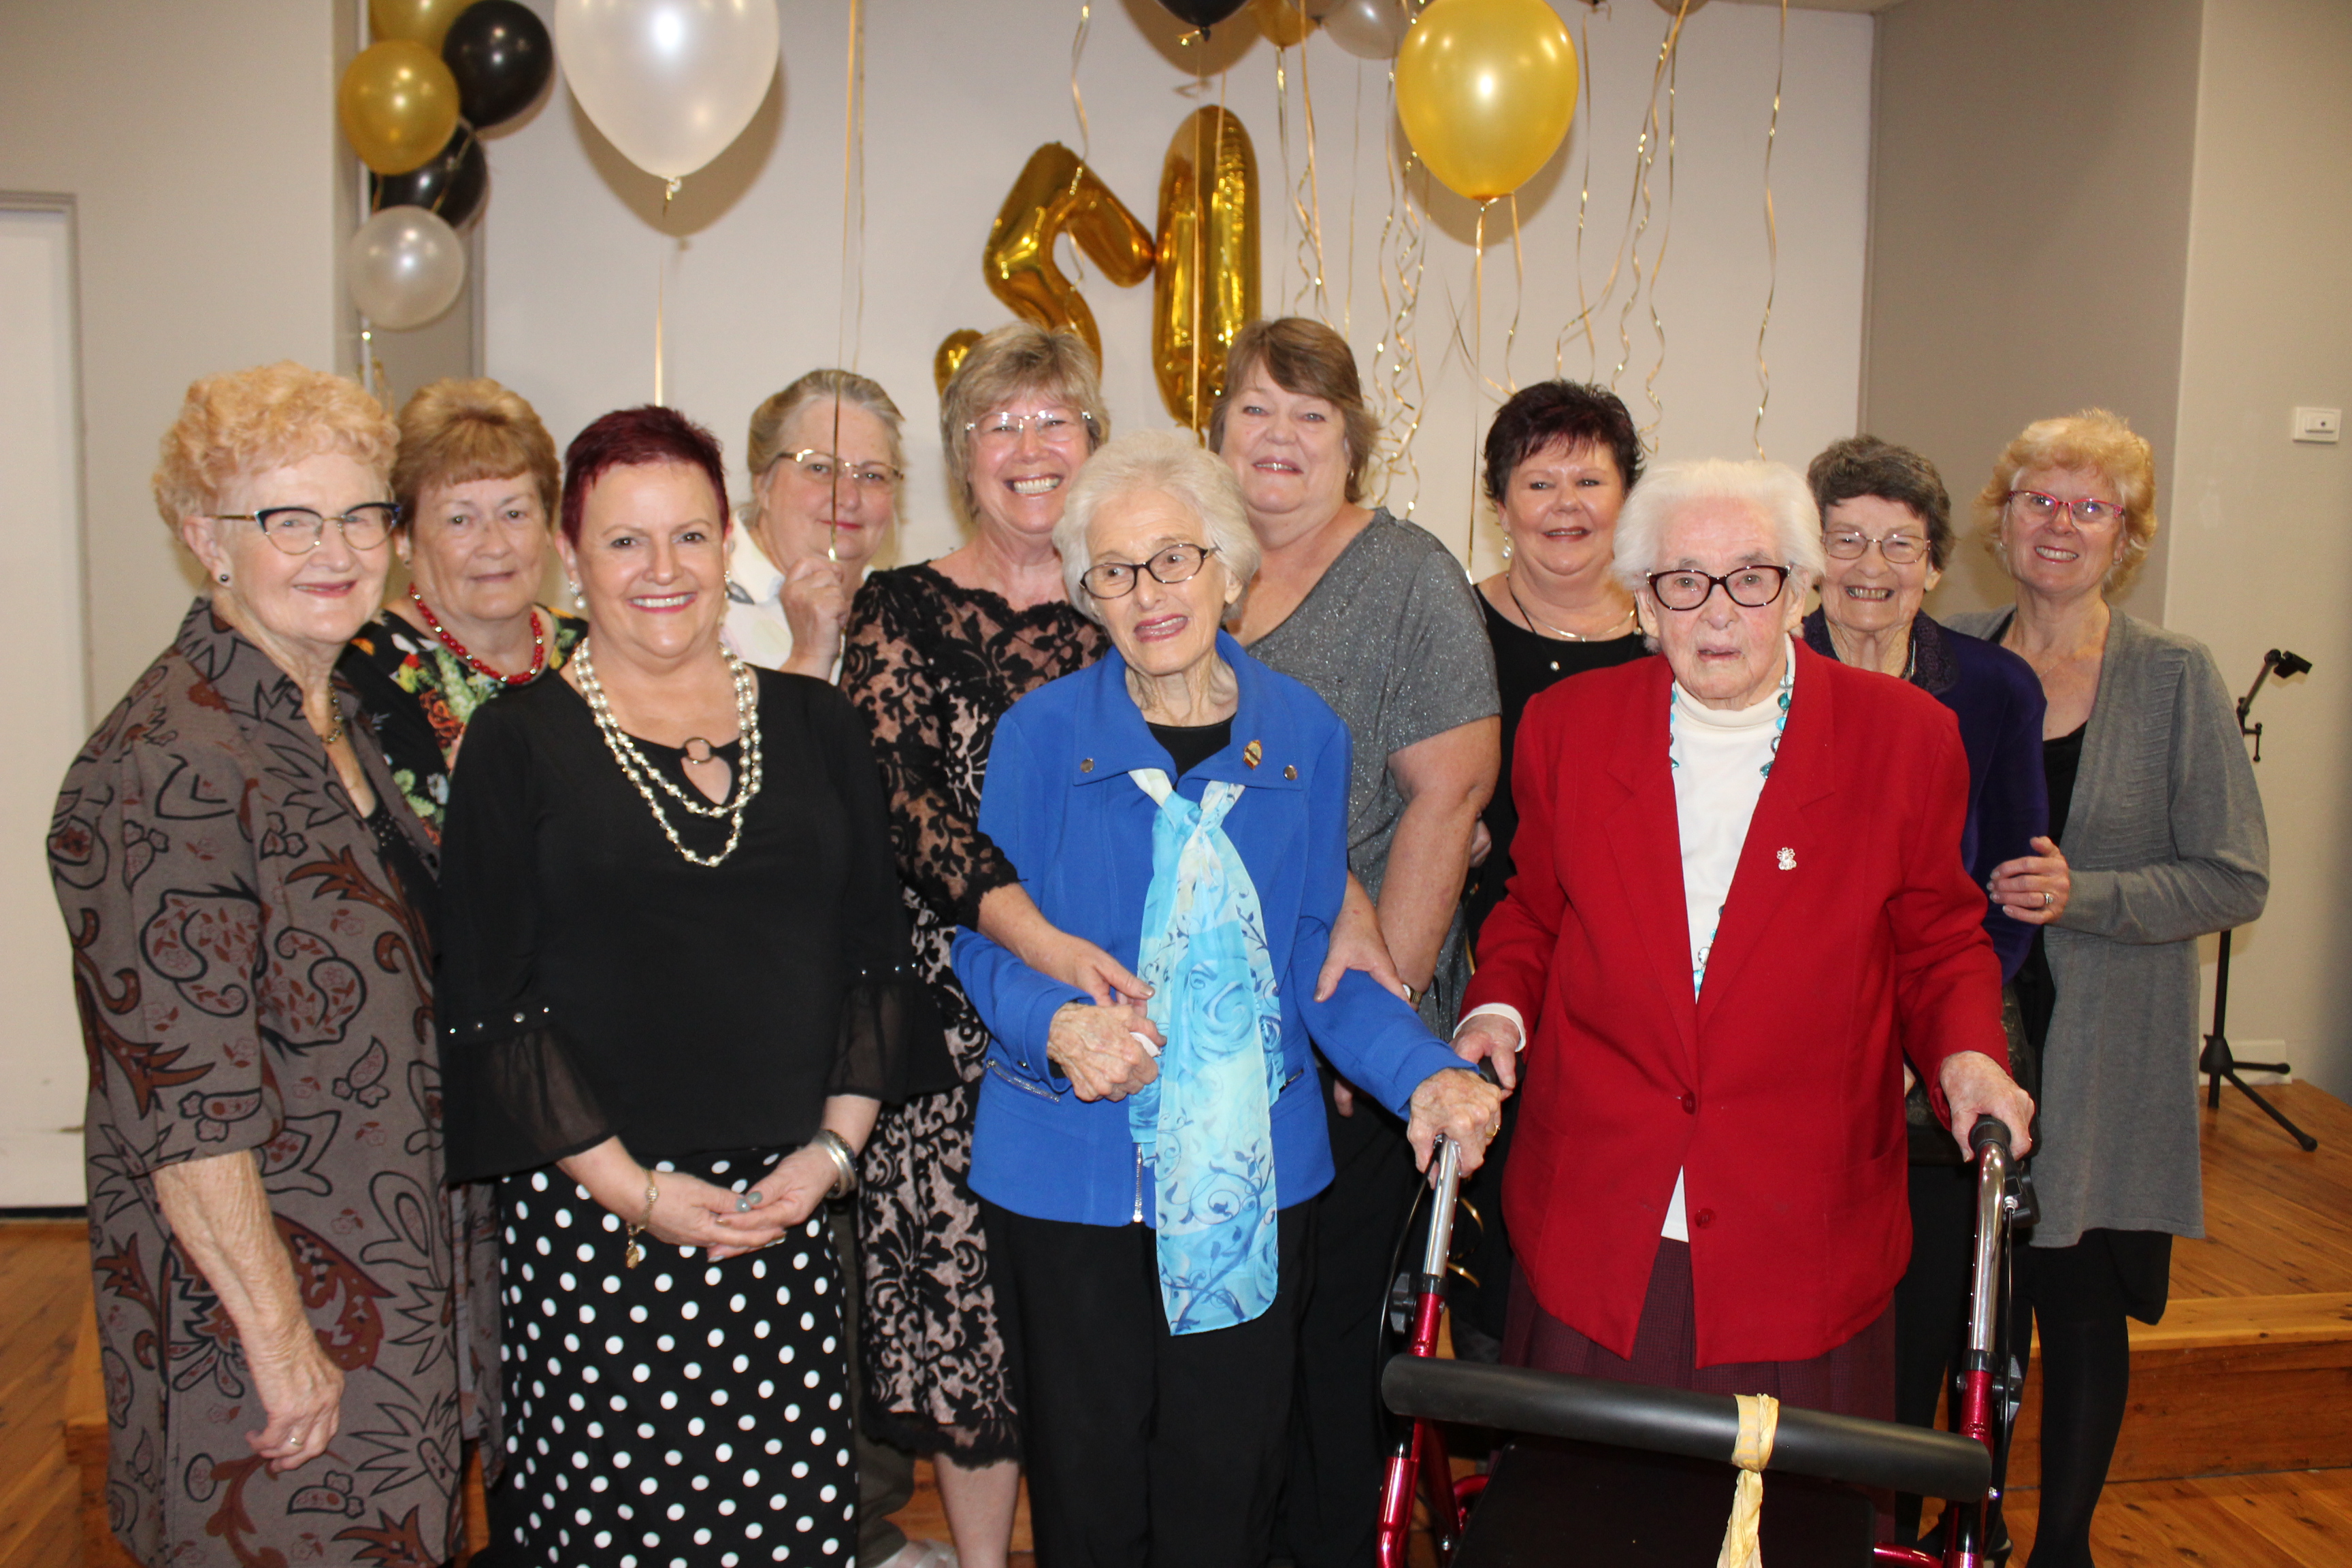 50th anniversary celebrations for Narrabri Meals on Wheels